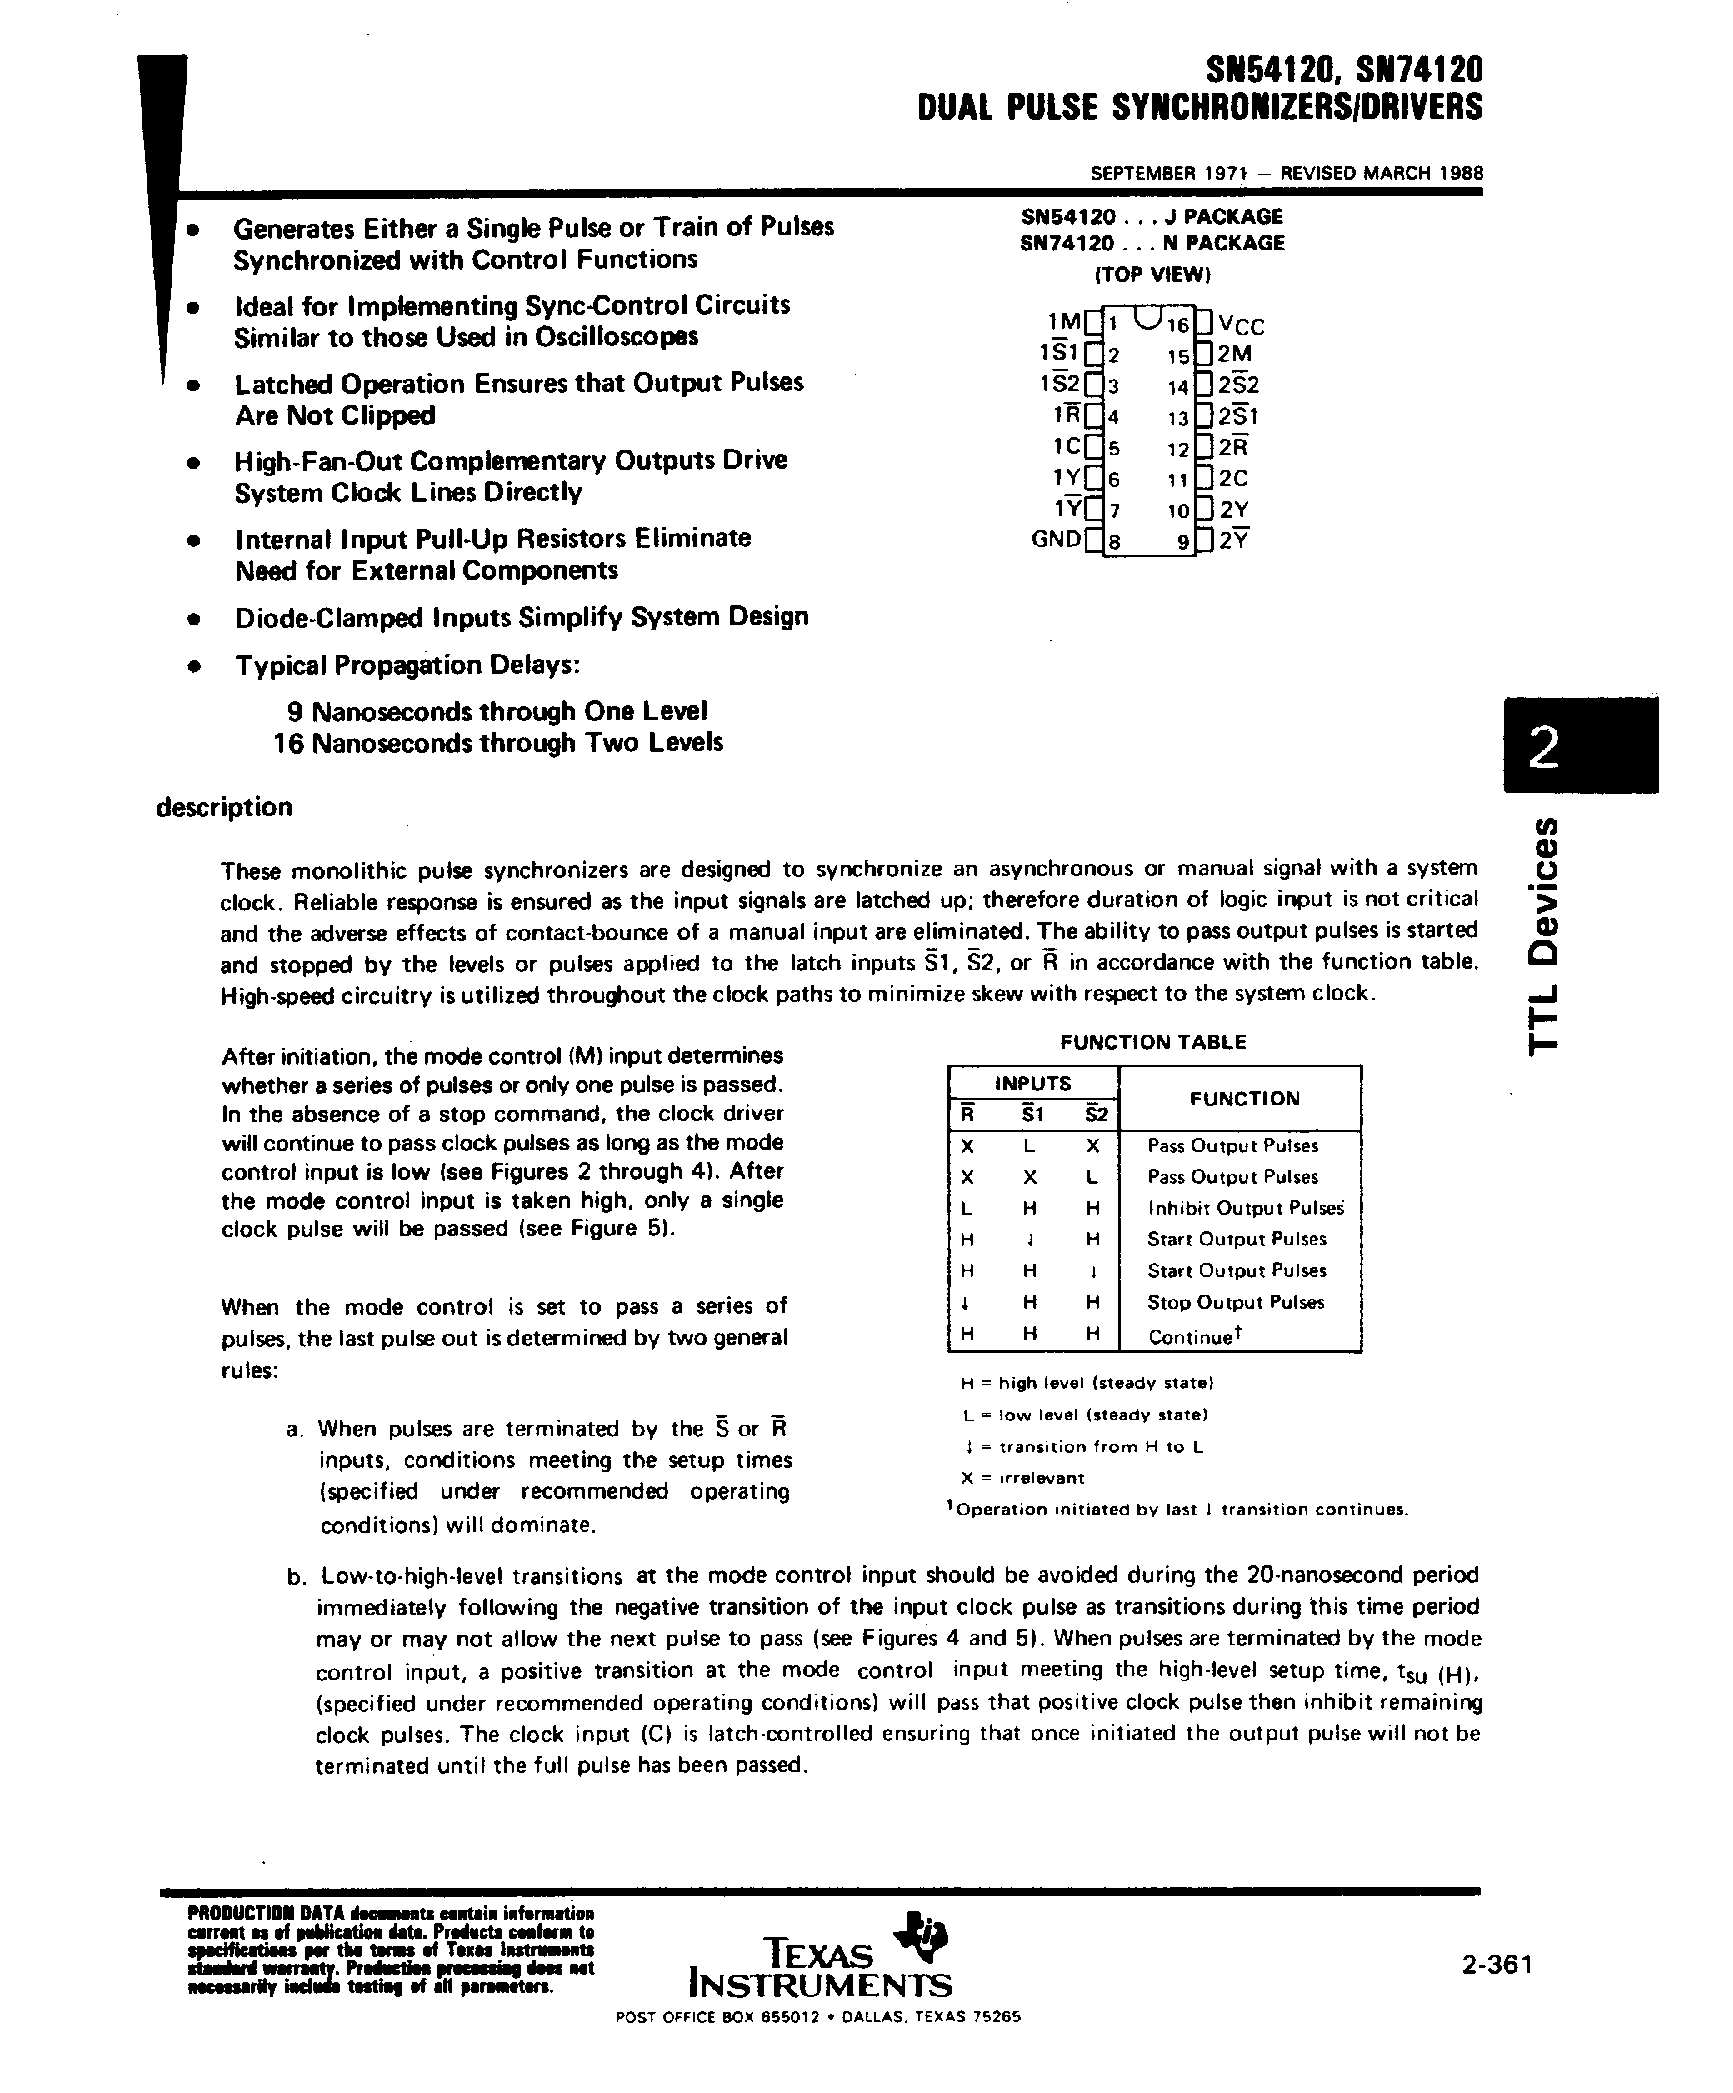 Datasheet SN74120 - Dual Pulse Synchronizers / Drivers page 1